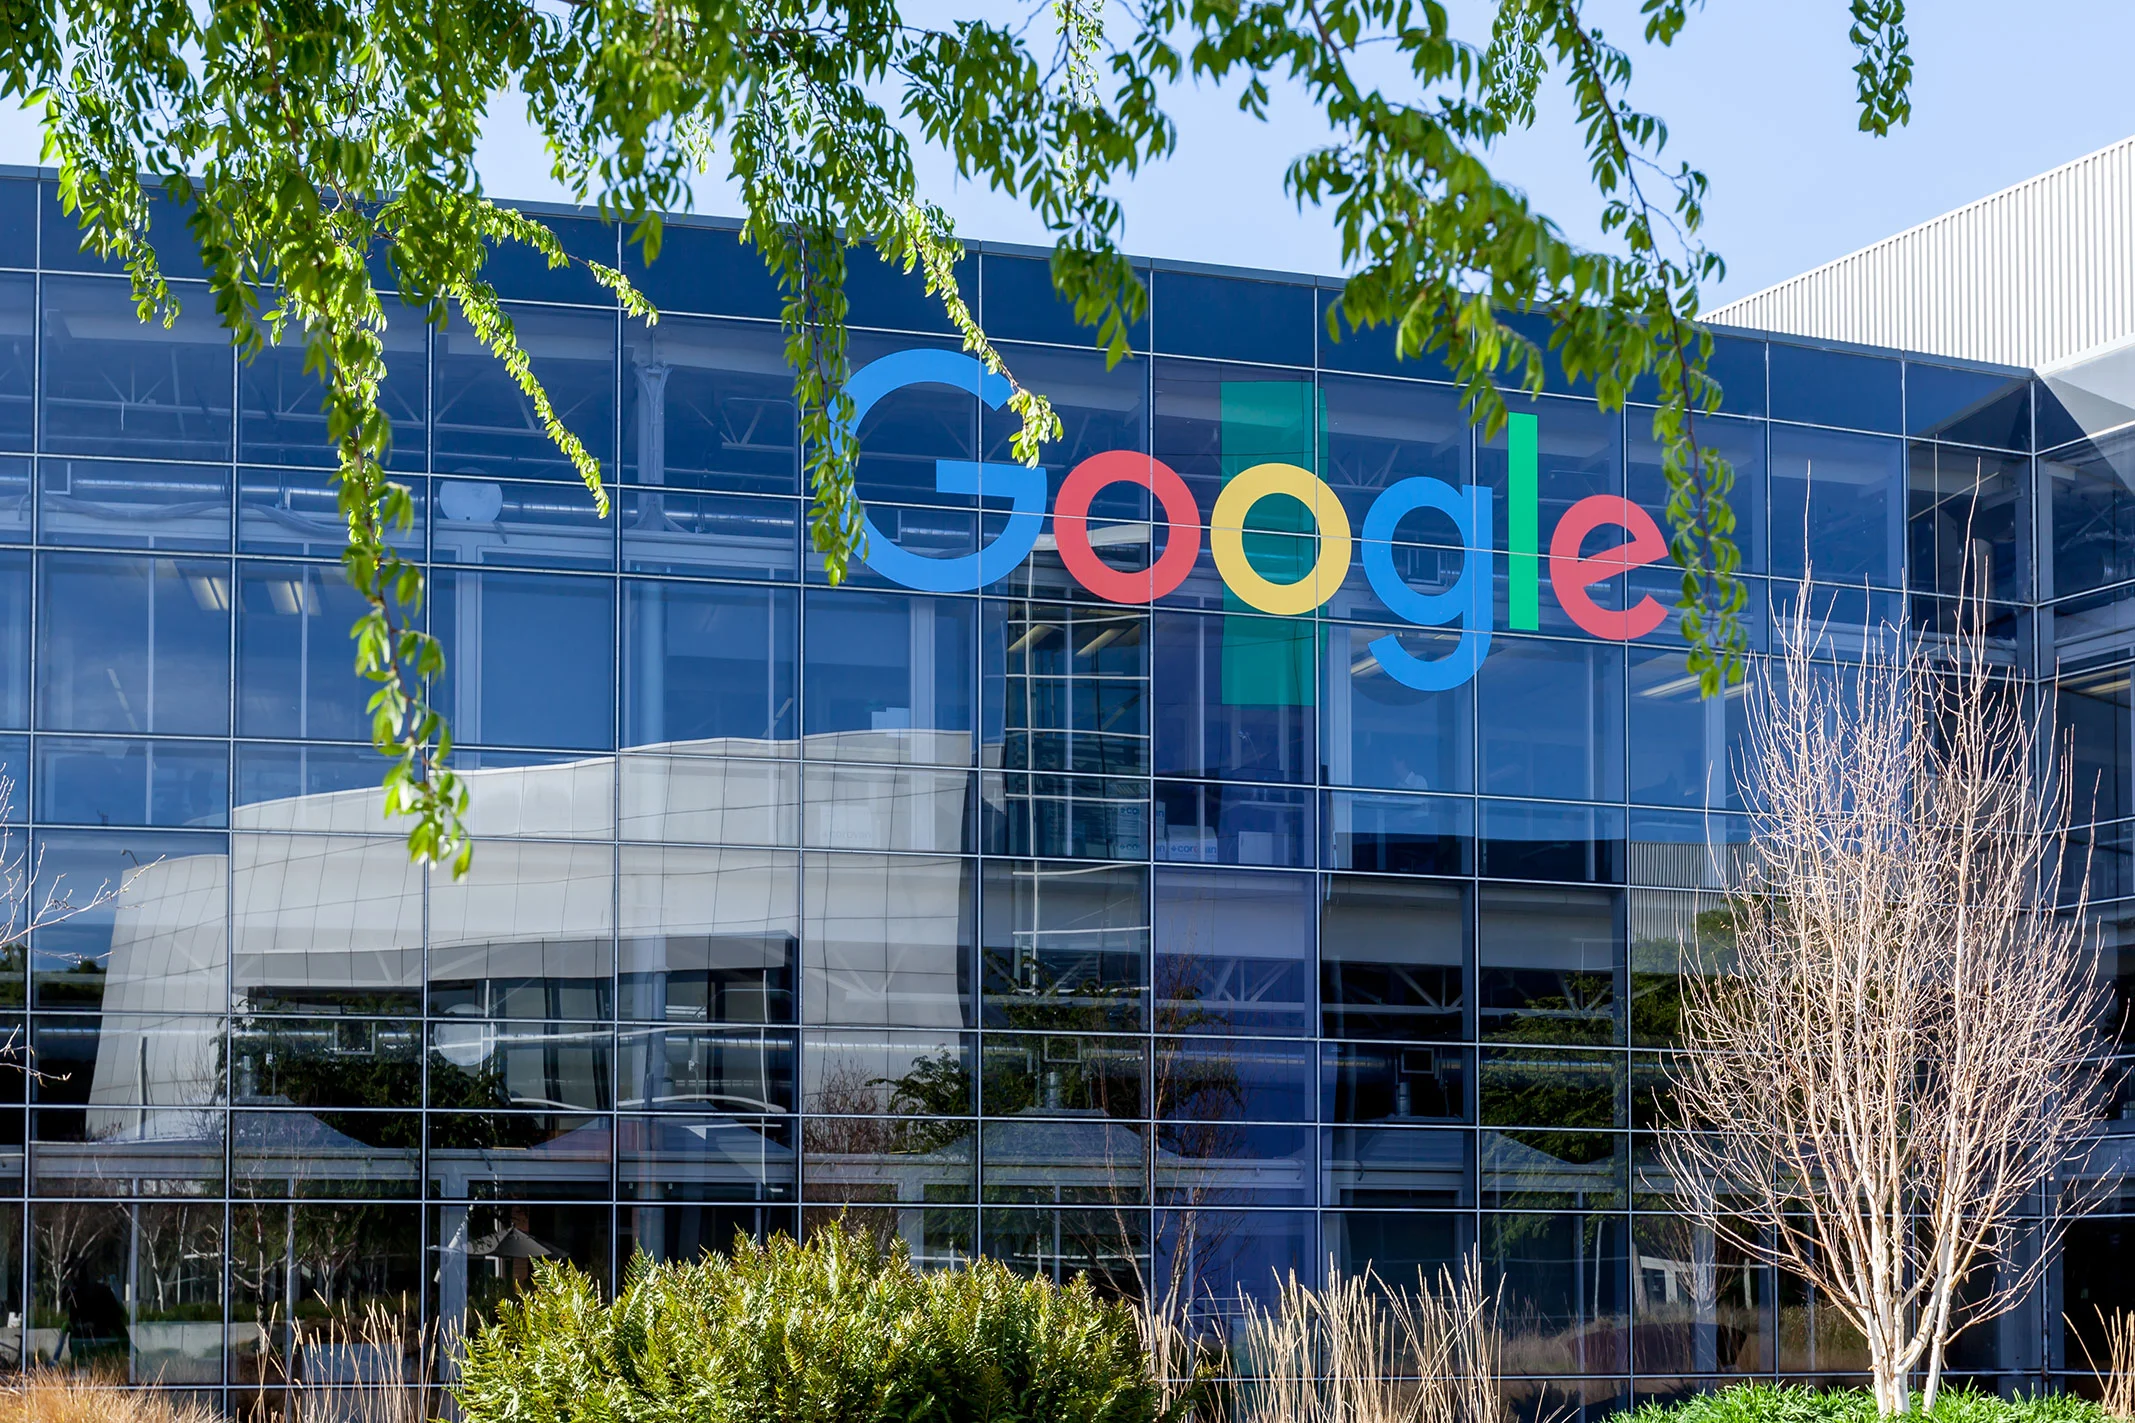 Google BANED Free speachMisleading Medical Claims That Defy Existing Medical Consensus